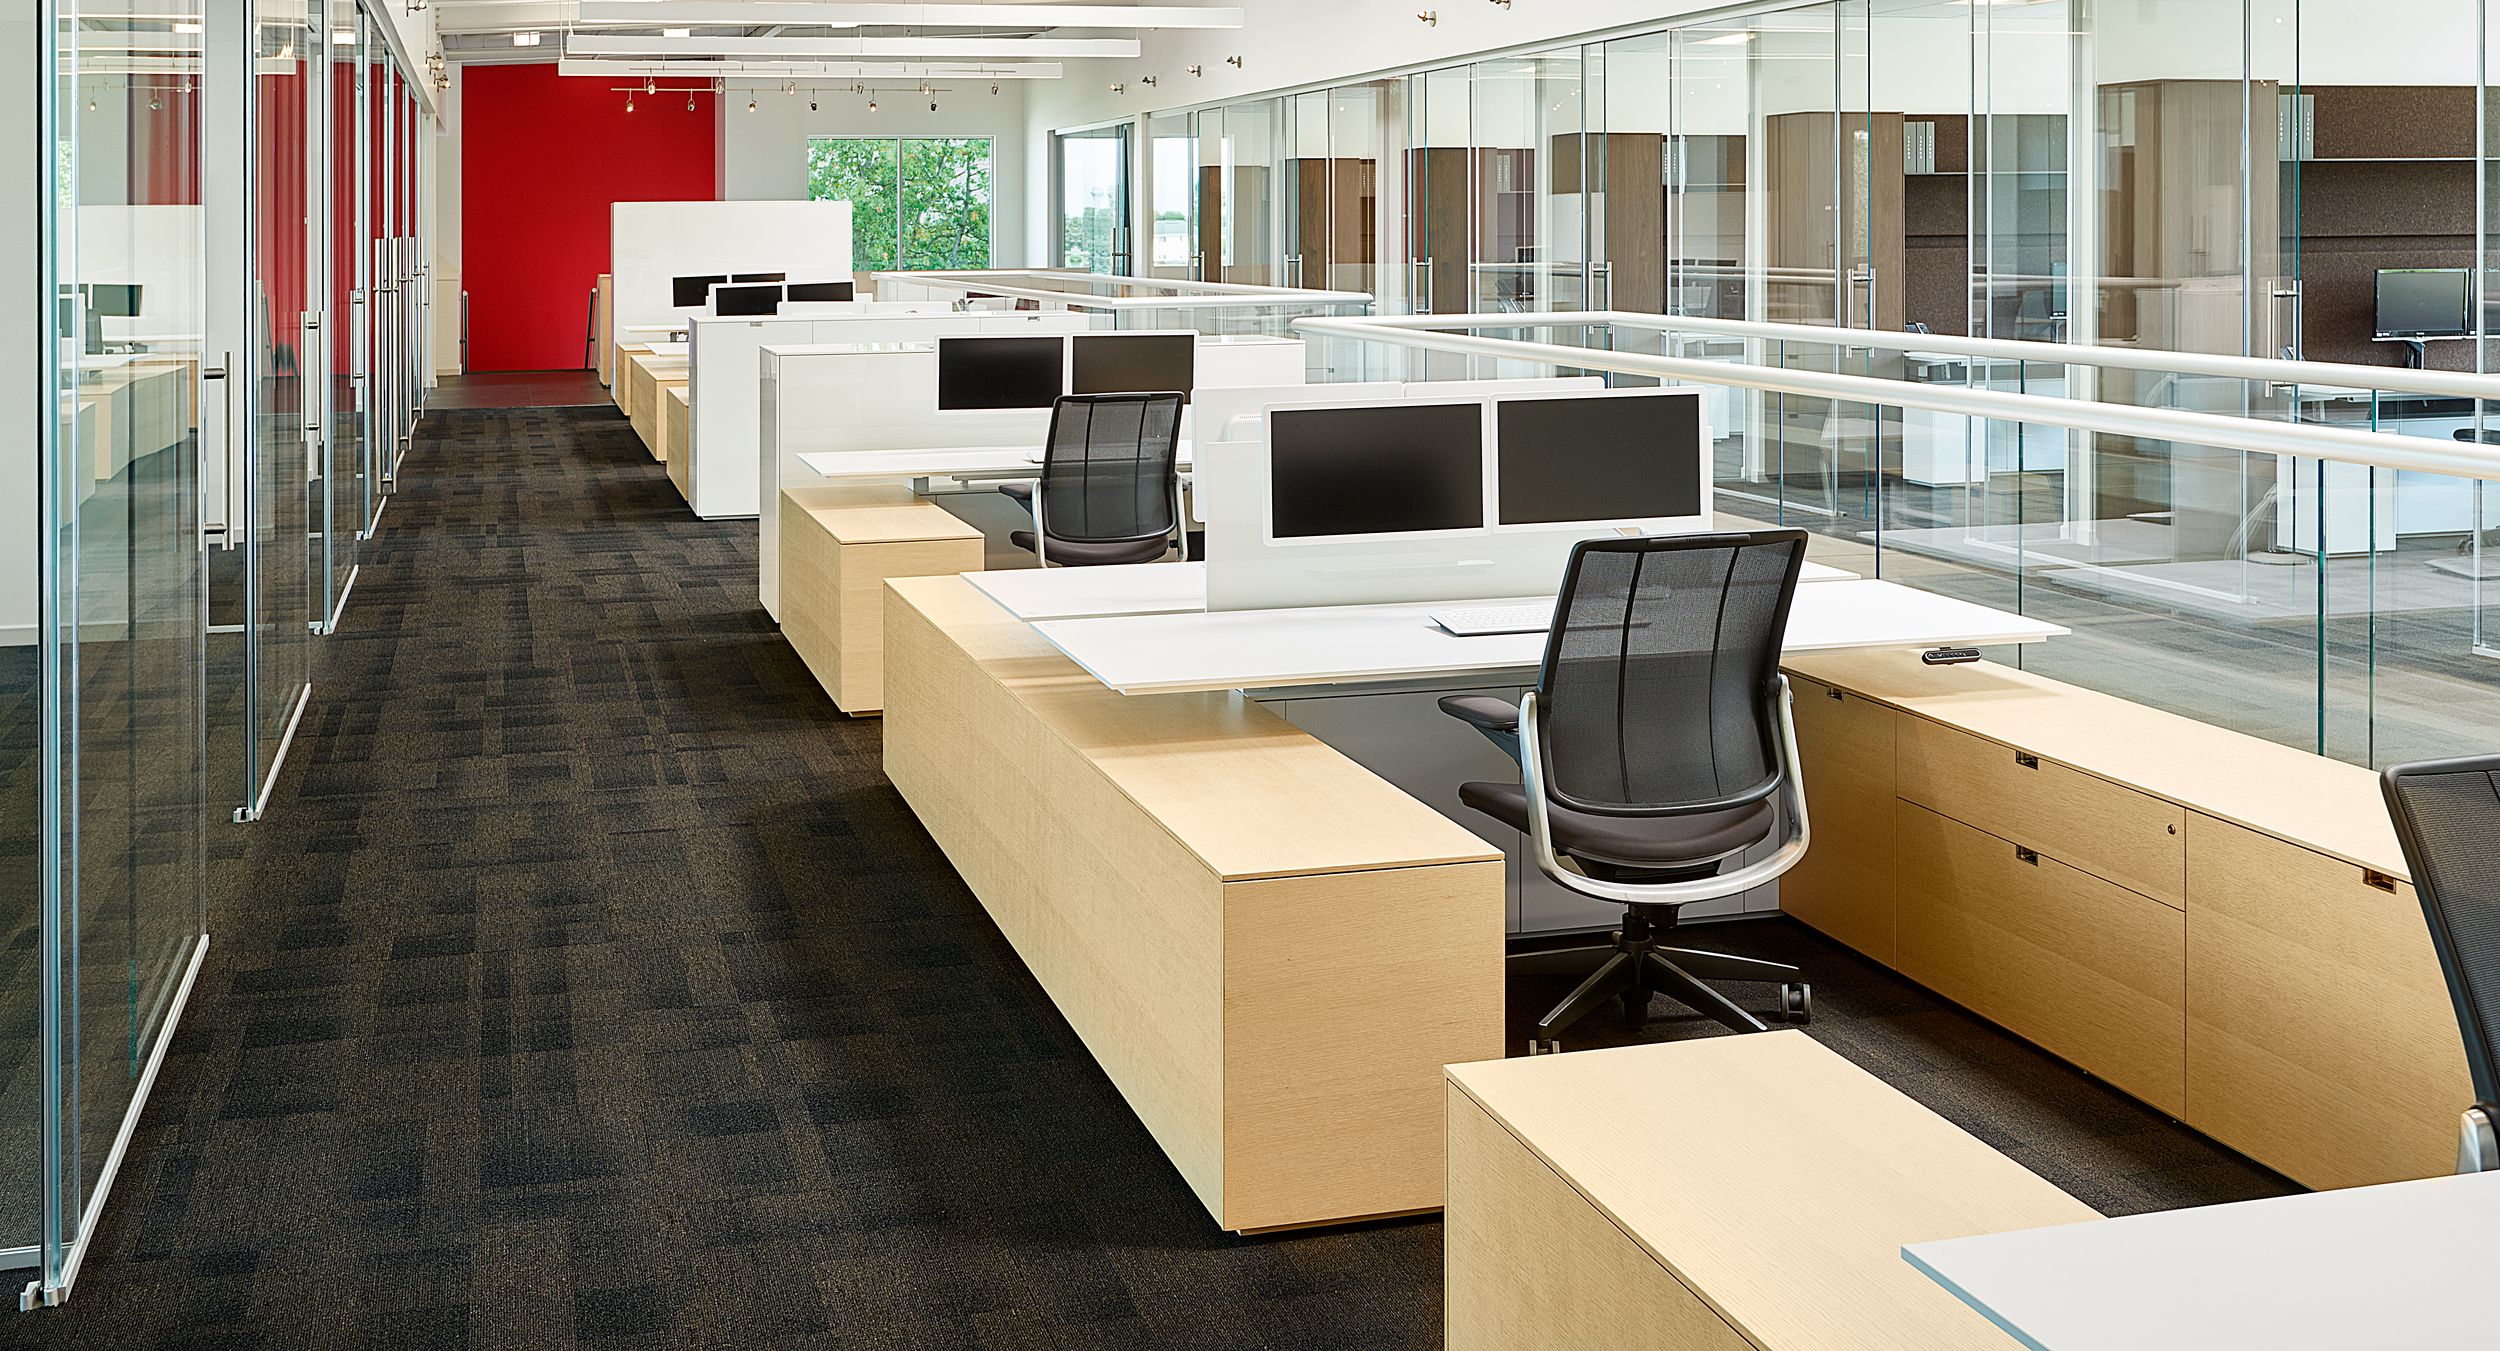 Adjustable-height desking, high gloss acrylic screens, and sleek low storage highlight our sales support workstations.